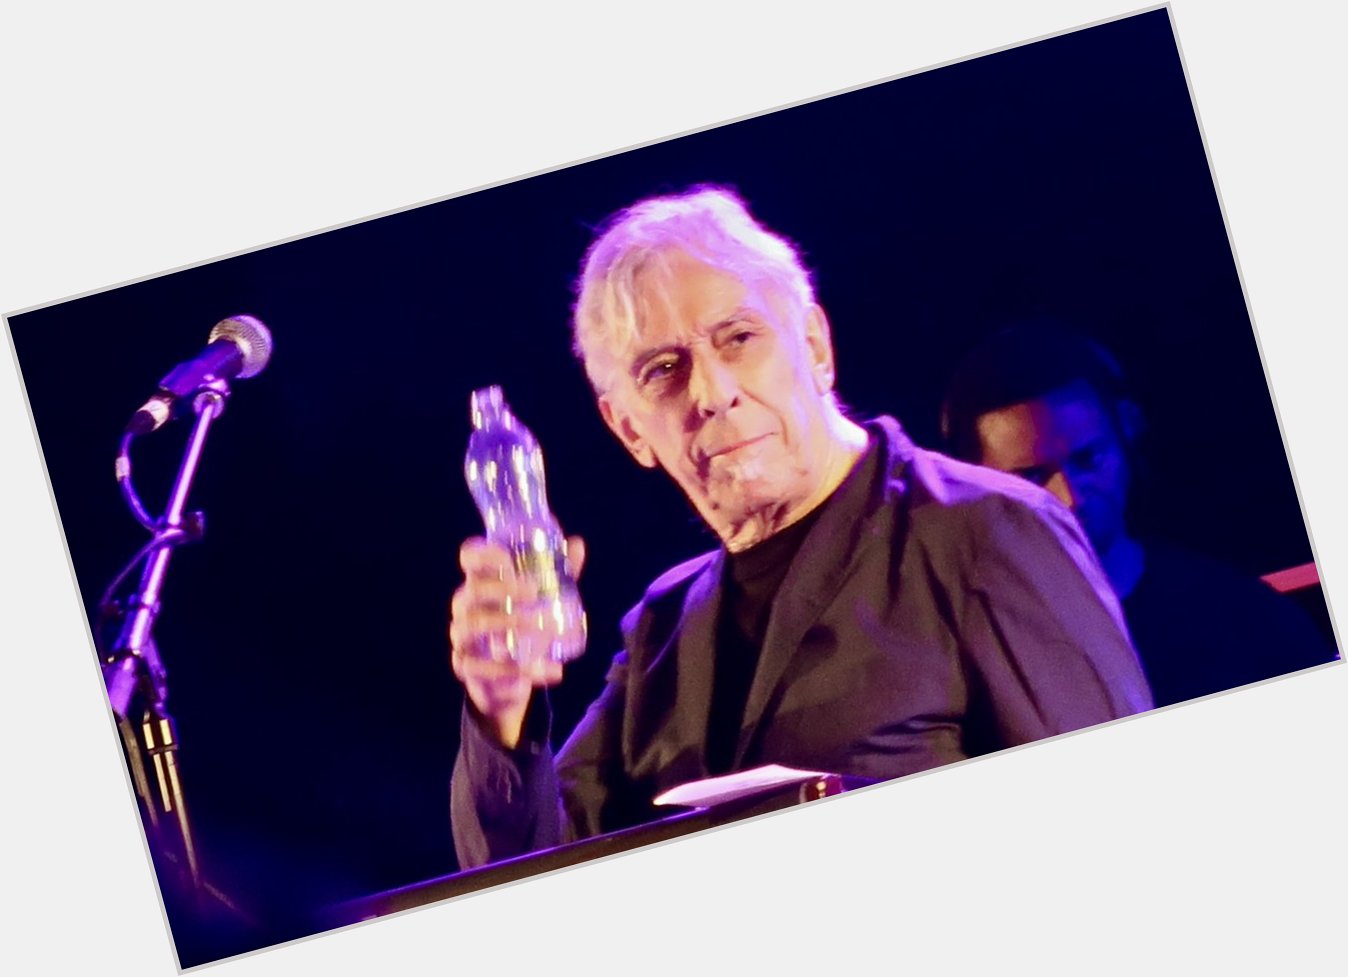 Happy birthday to John Cale - photos taken at in January 